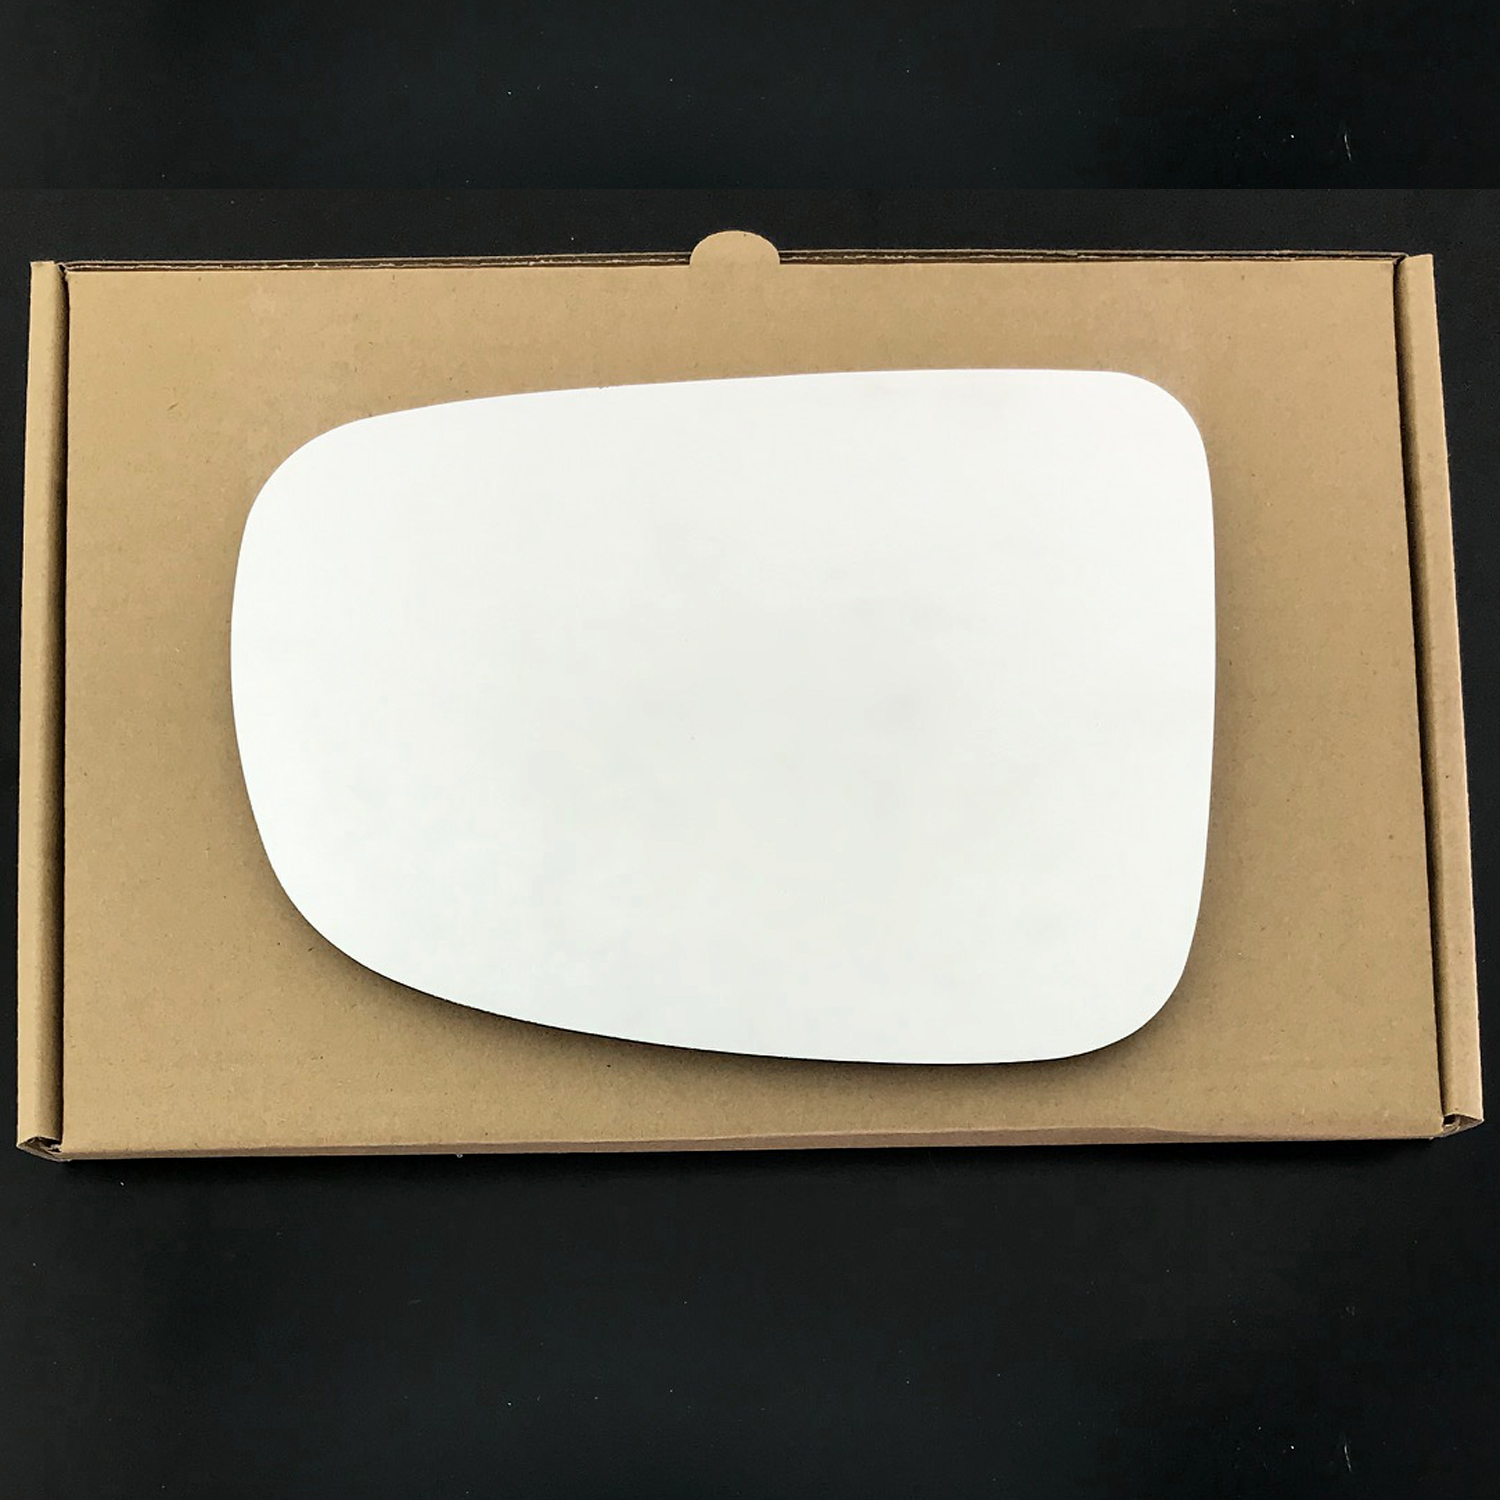 Ford Transit VAN Wing Mirror Glass LEFT HAND ( UK Passenger Side ) 1994 to 2000 – Convex Wing Mirror ( Electric mirror )